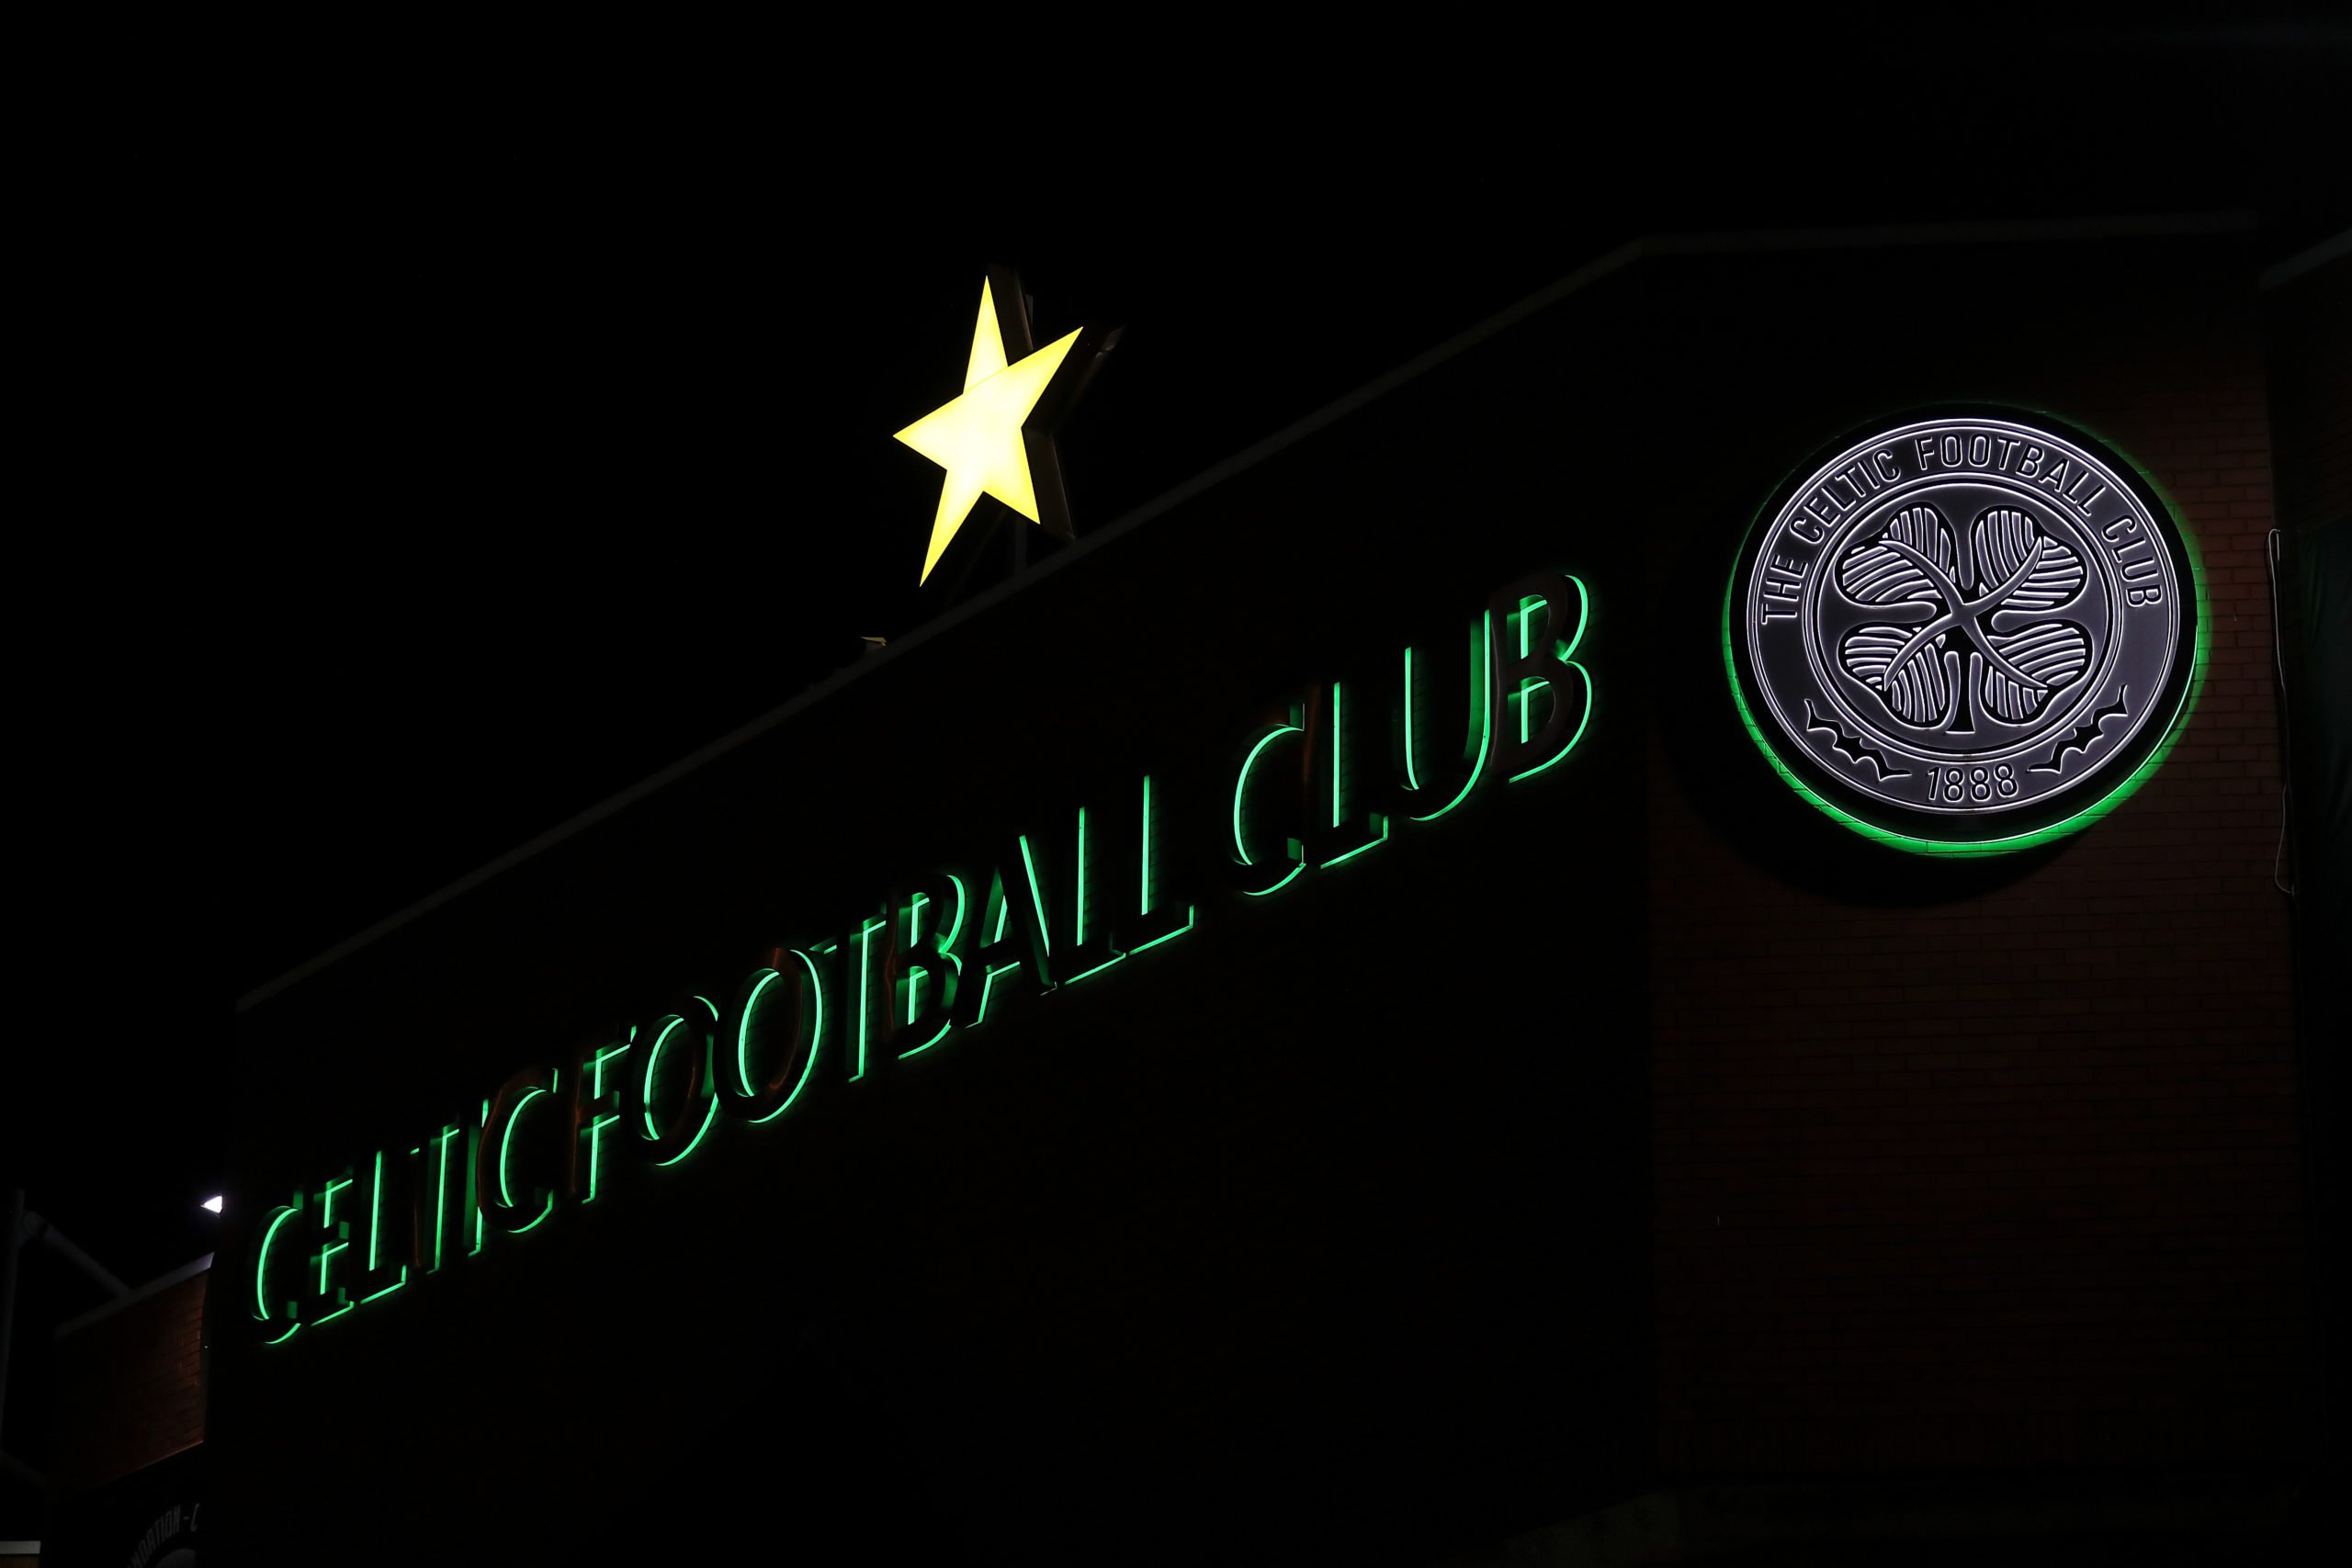 Celtic fans called to action on 13th December as Trust gears up campaign